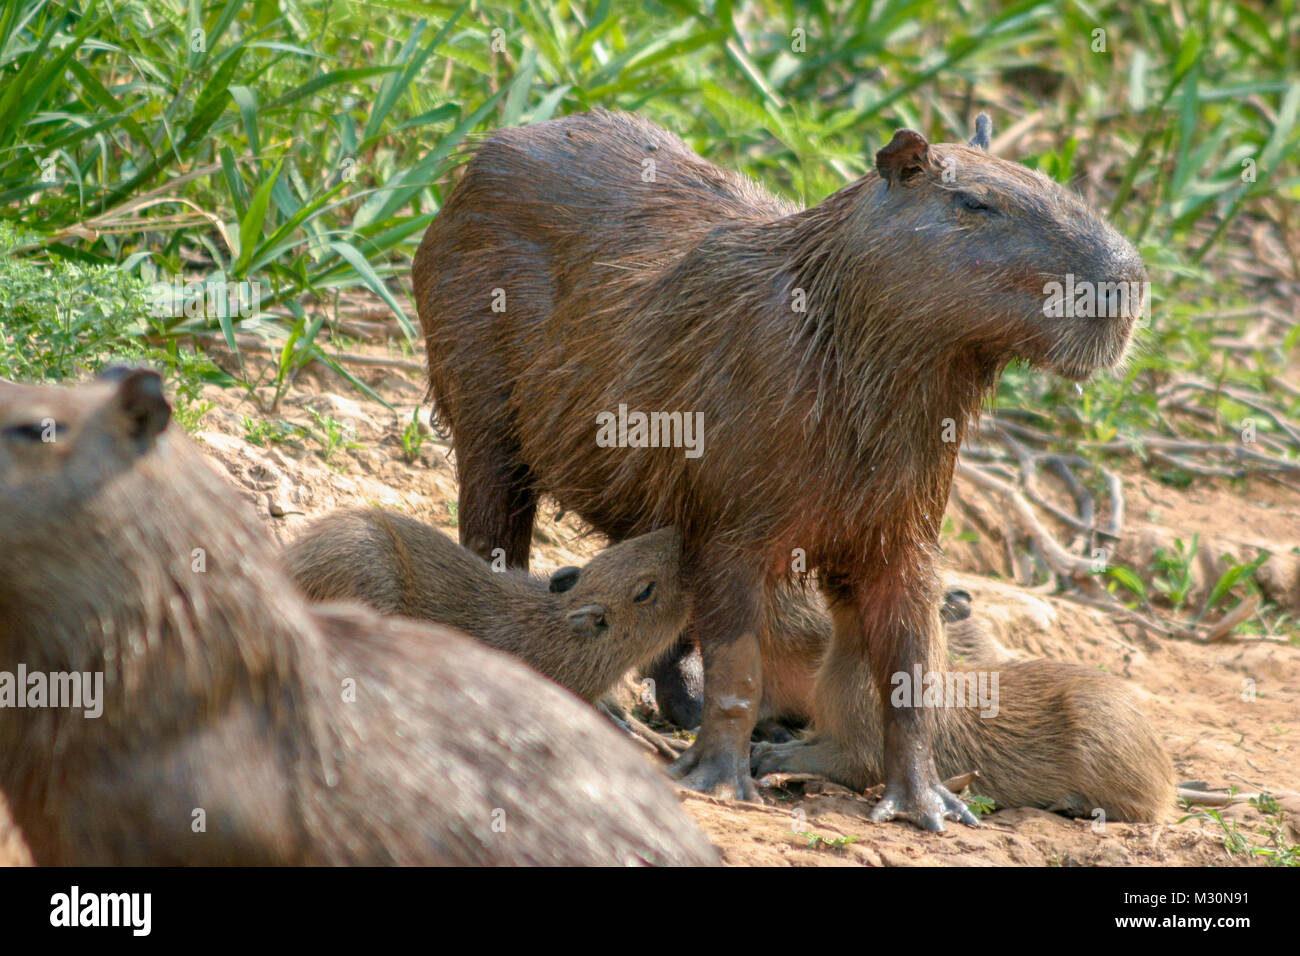 Capybaras (Hydrochoerus hydrochaeris), native to South America, are the largest rodent in the world. Stock Photo